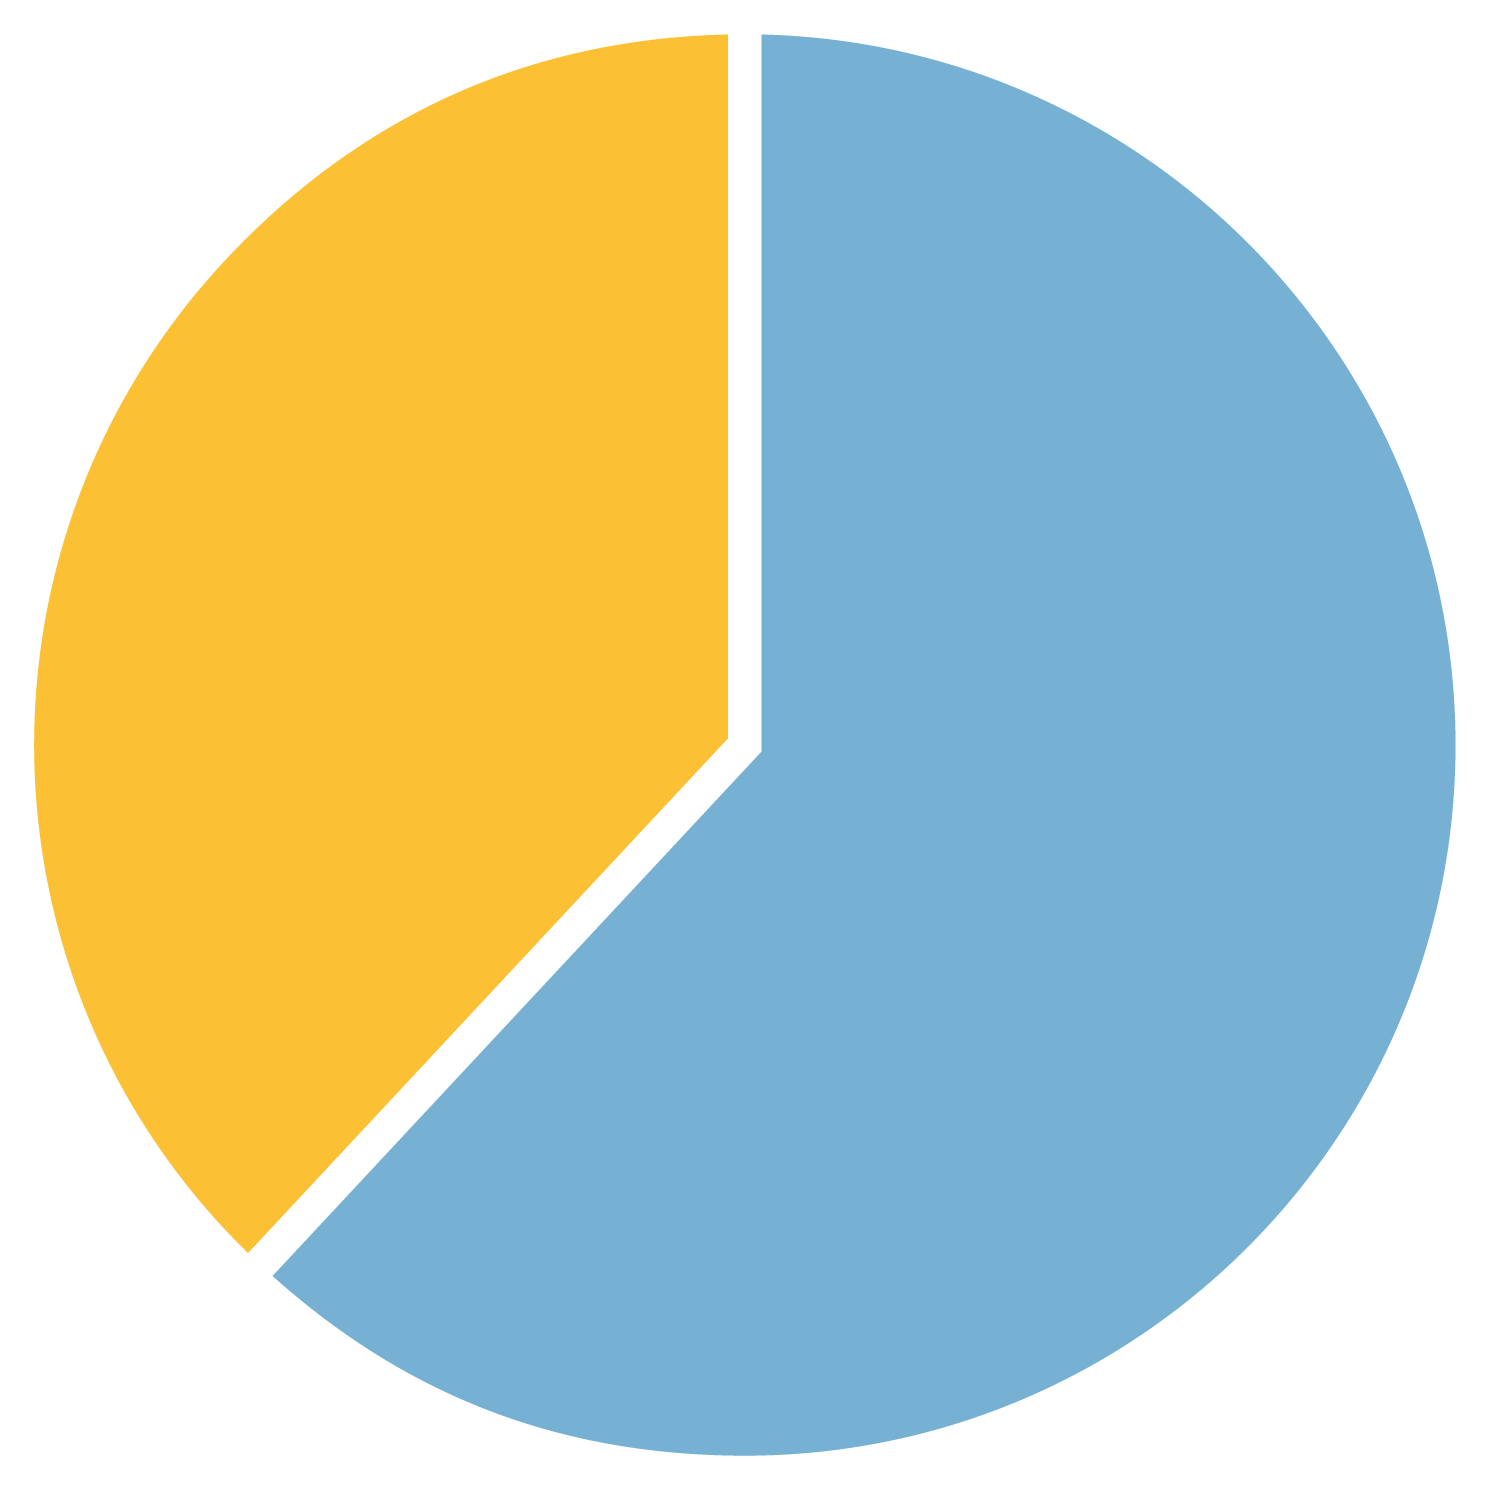 Pie chart displaying the percent distribution of males who had a co-diagnosis of autism. Males without autism: 62%. Males with autism: 38%.